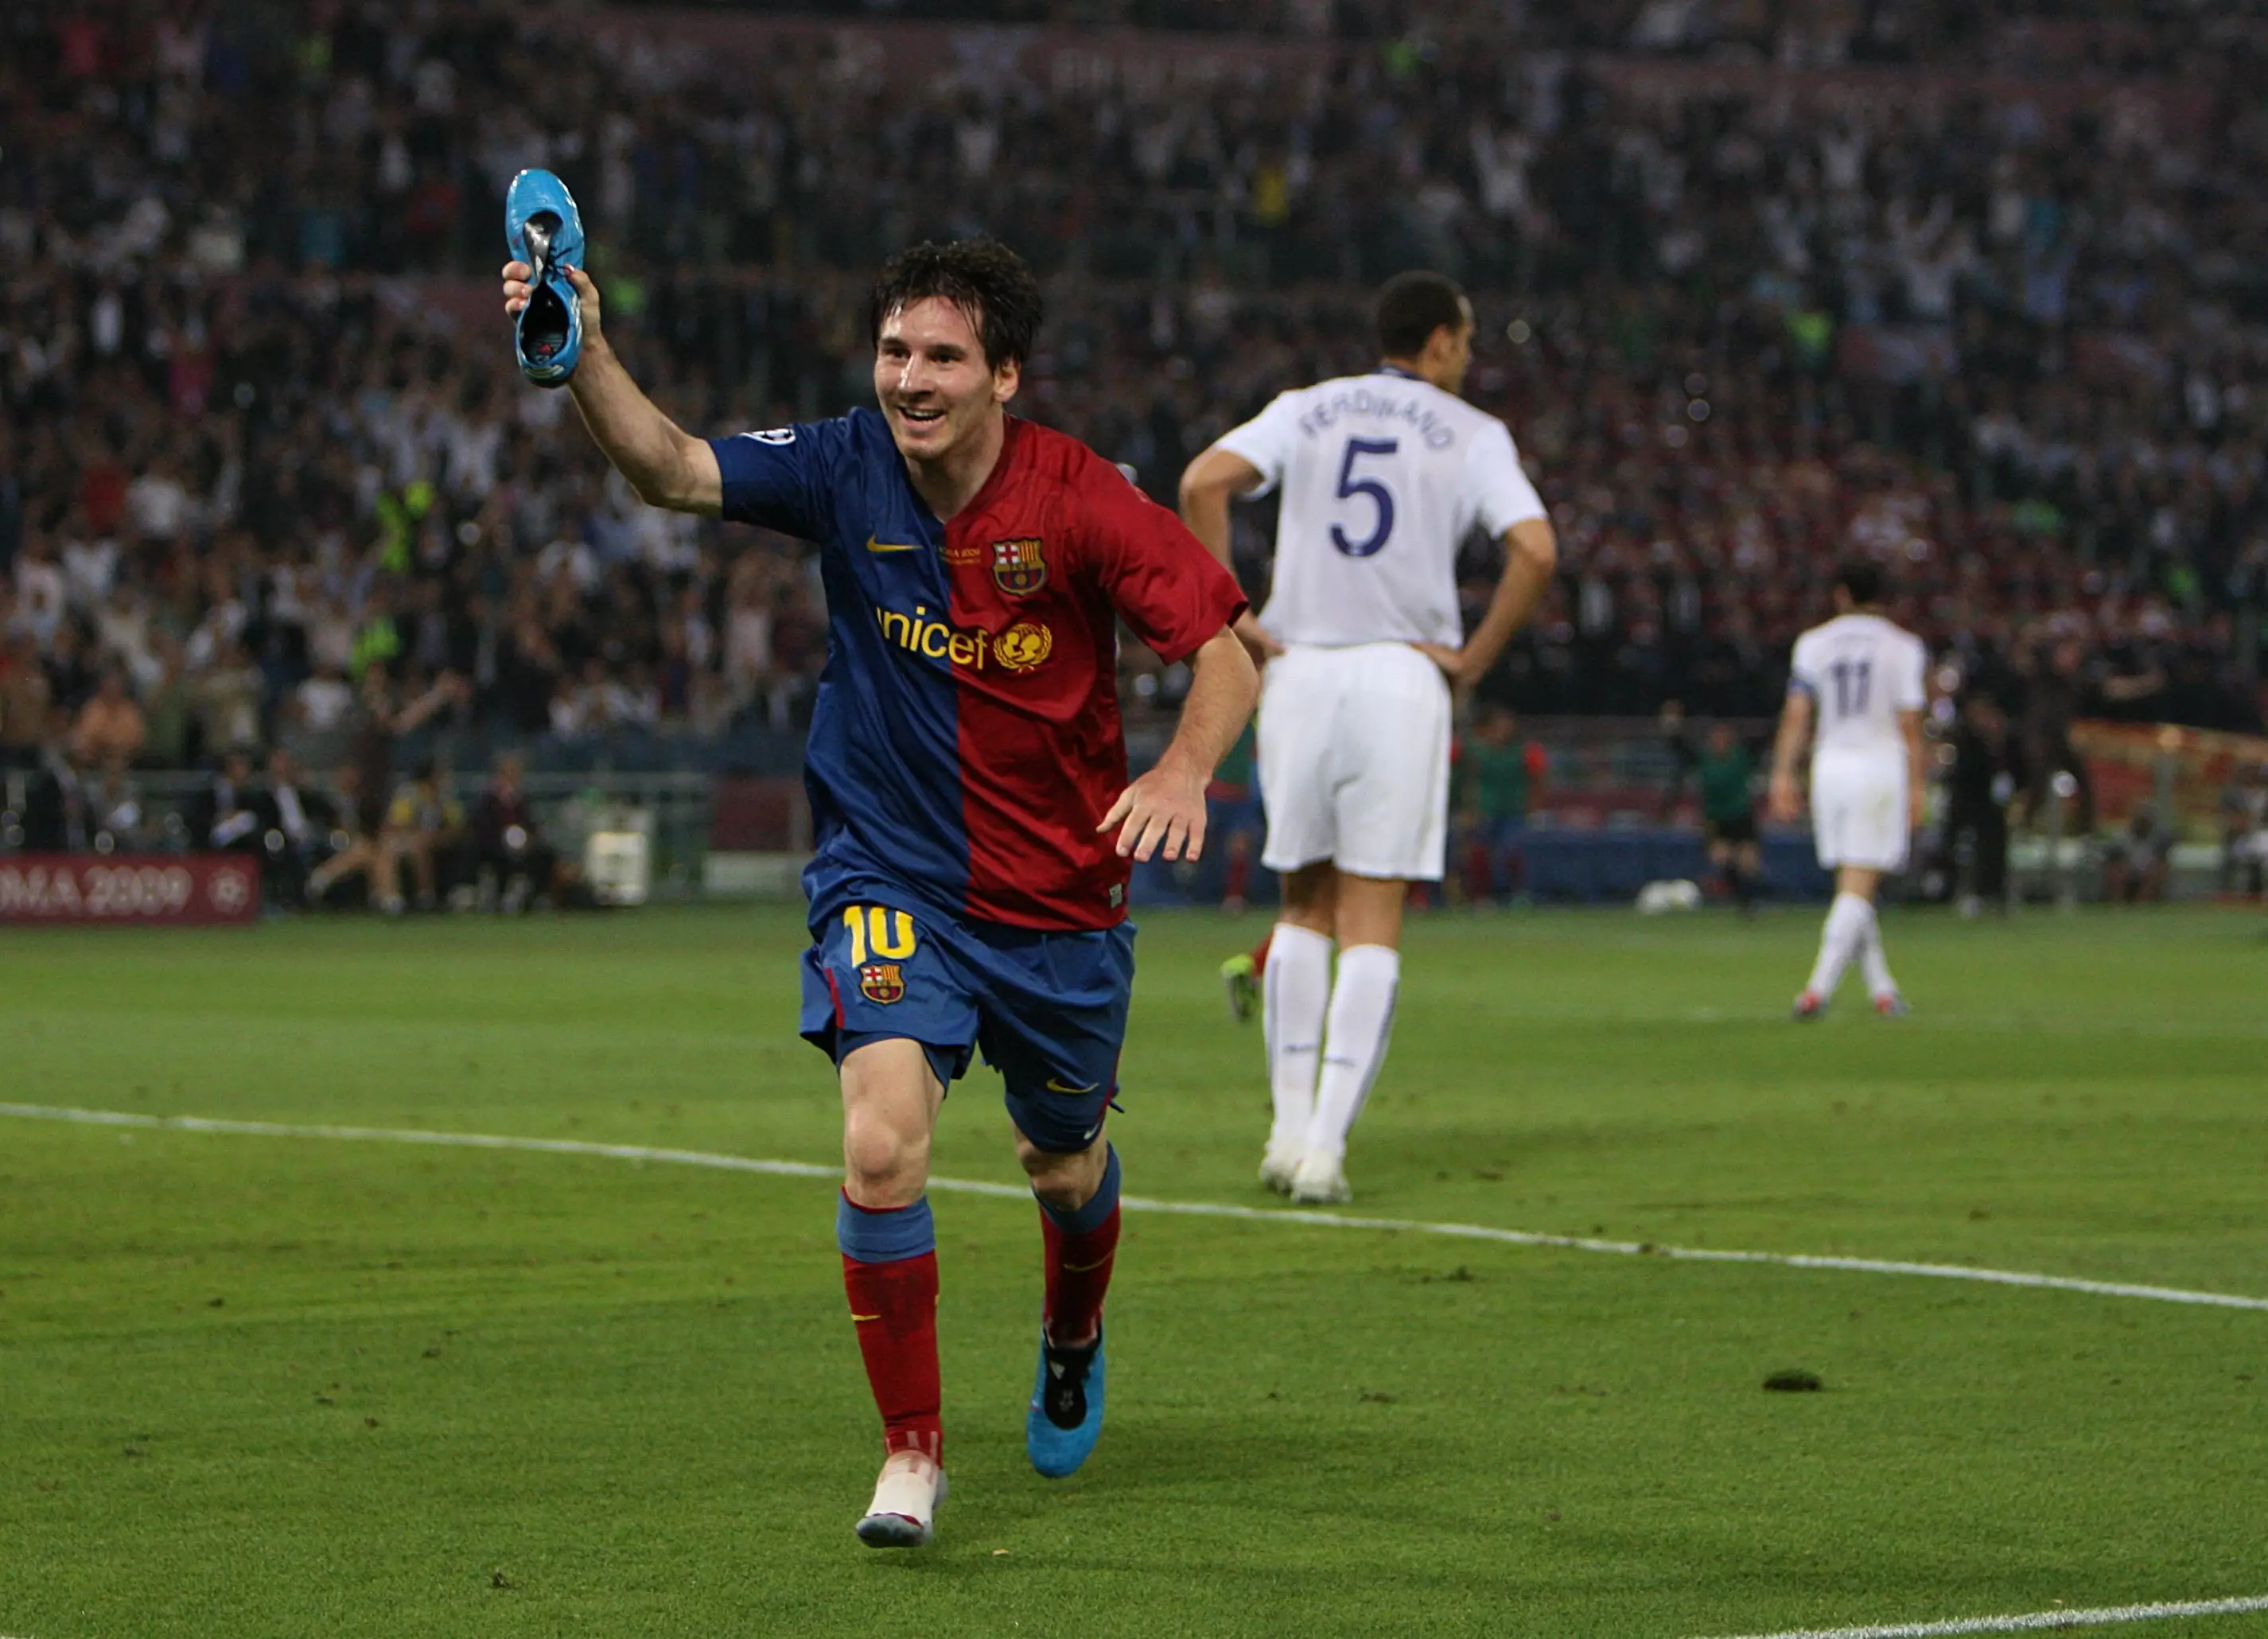 Messi celebrates scoring in the Champions League final. Image: PA